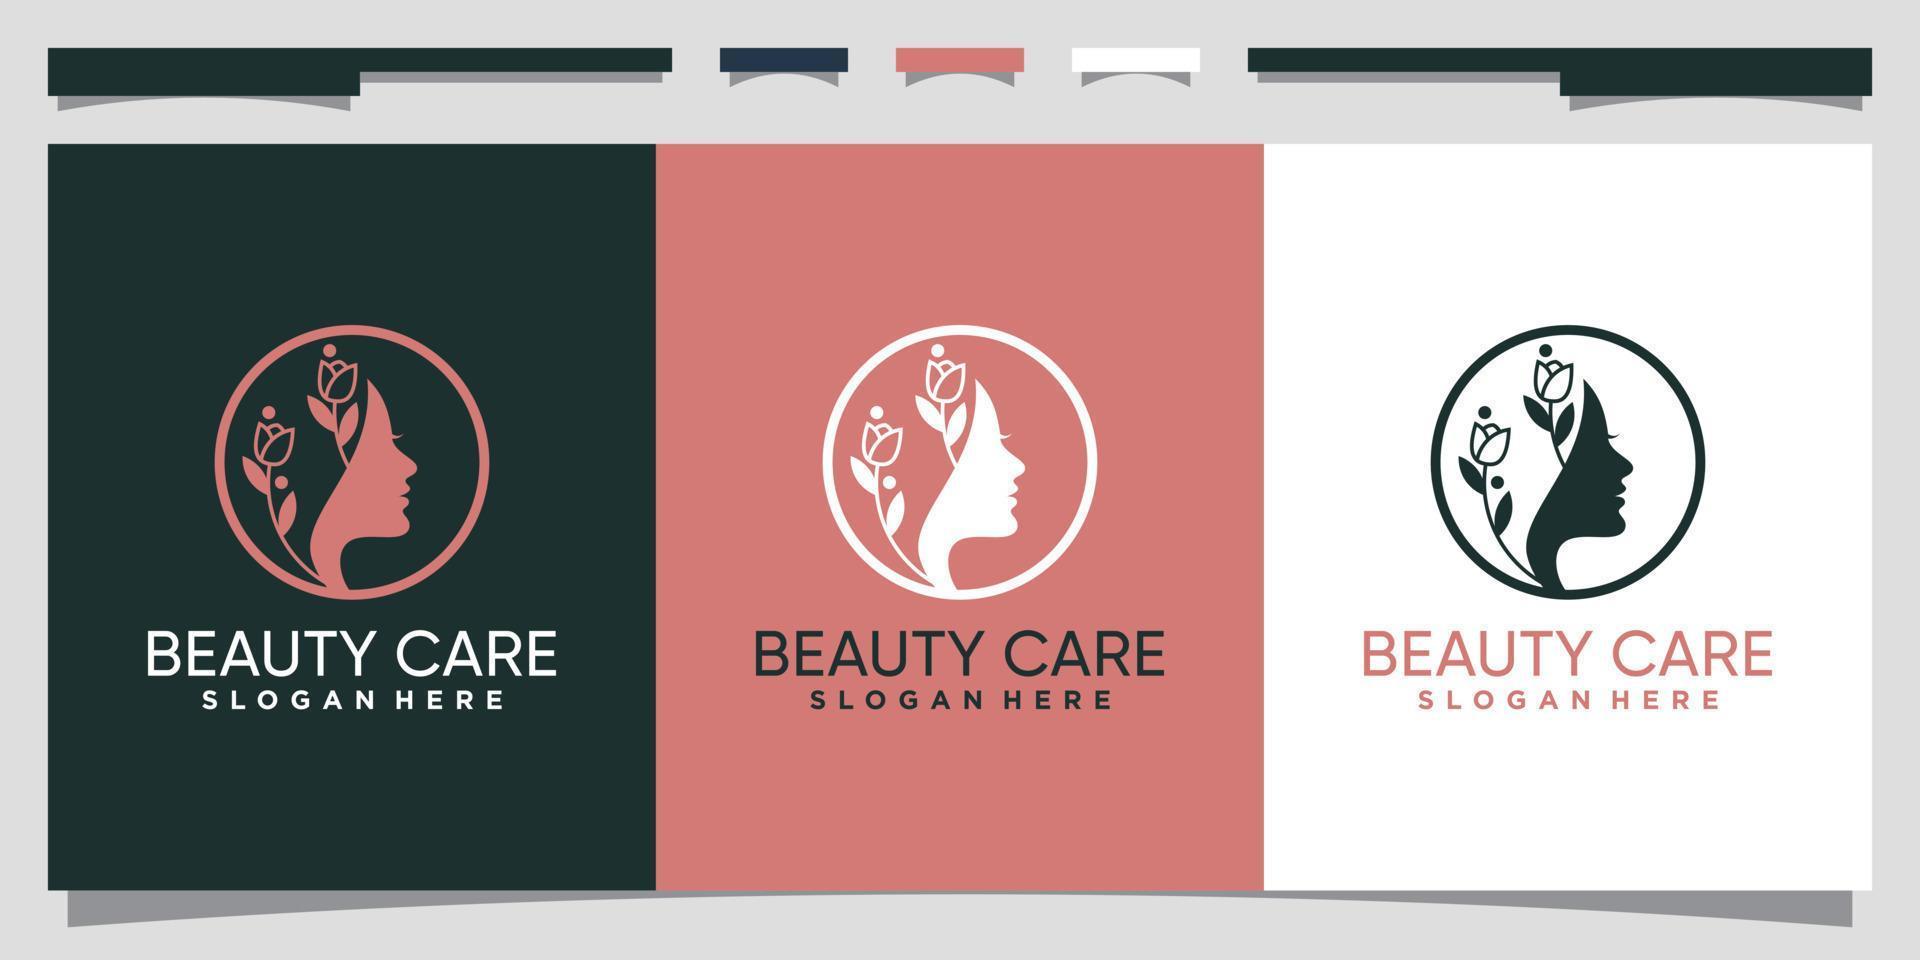 Beauty care logo design with woman face and line art style Premium Vector